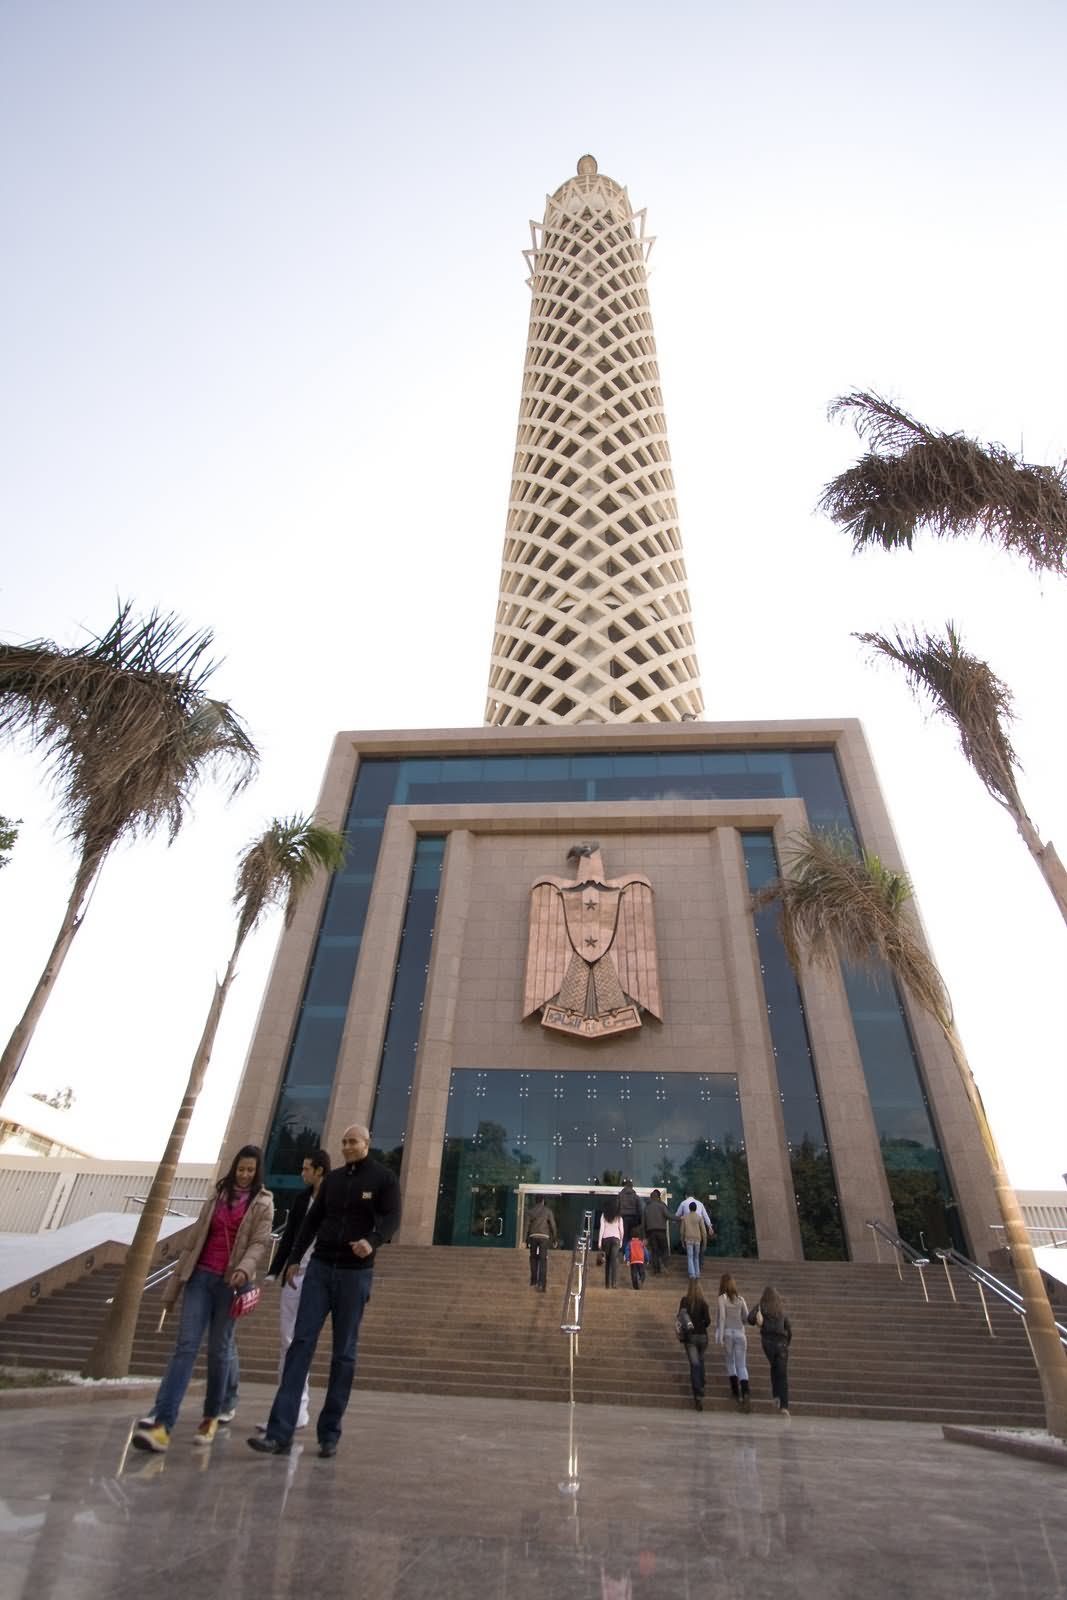 Entrance Of The Cairo Tower